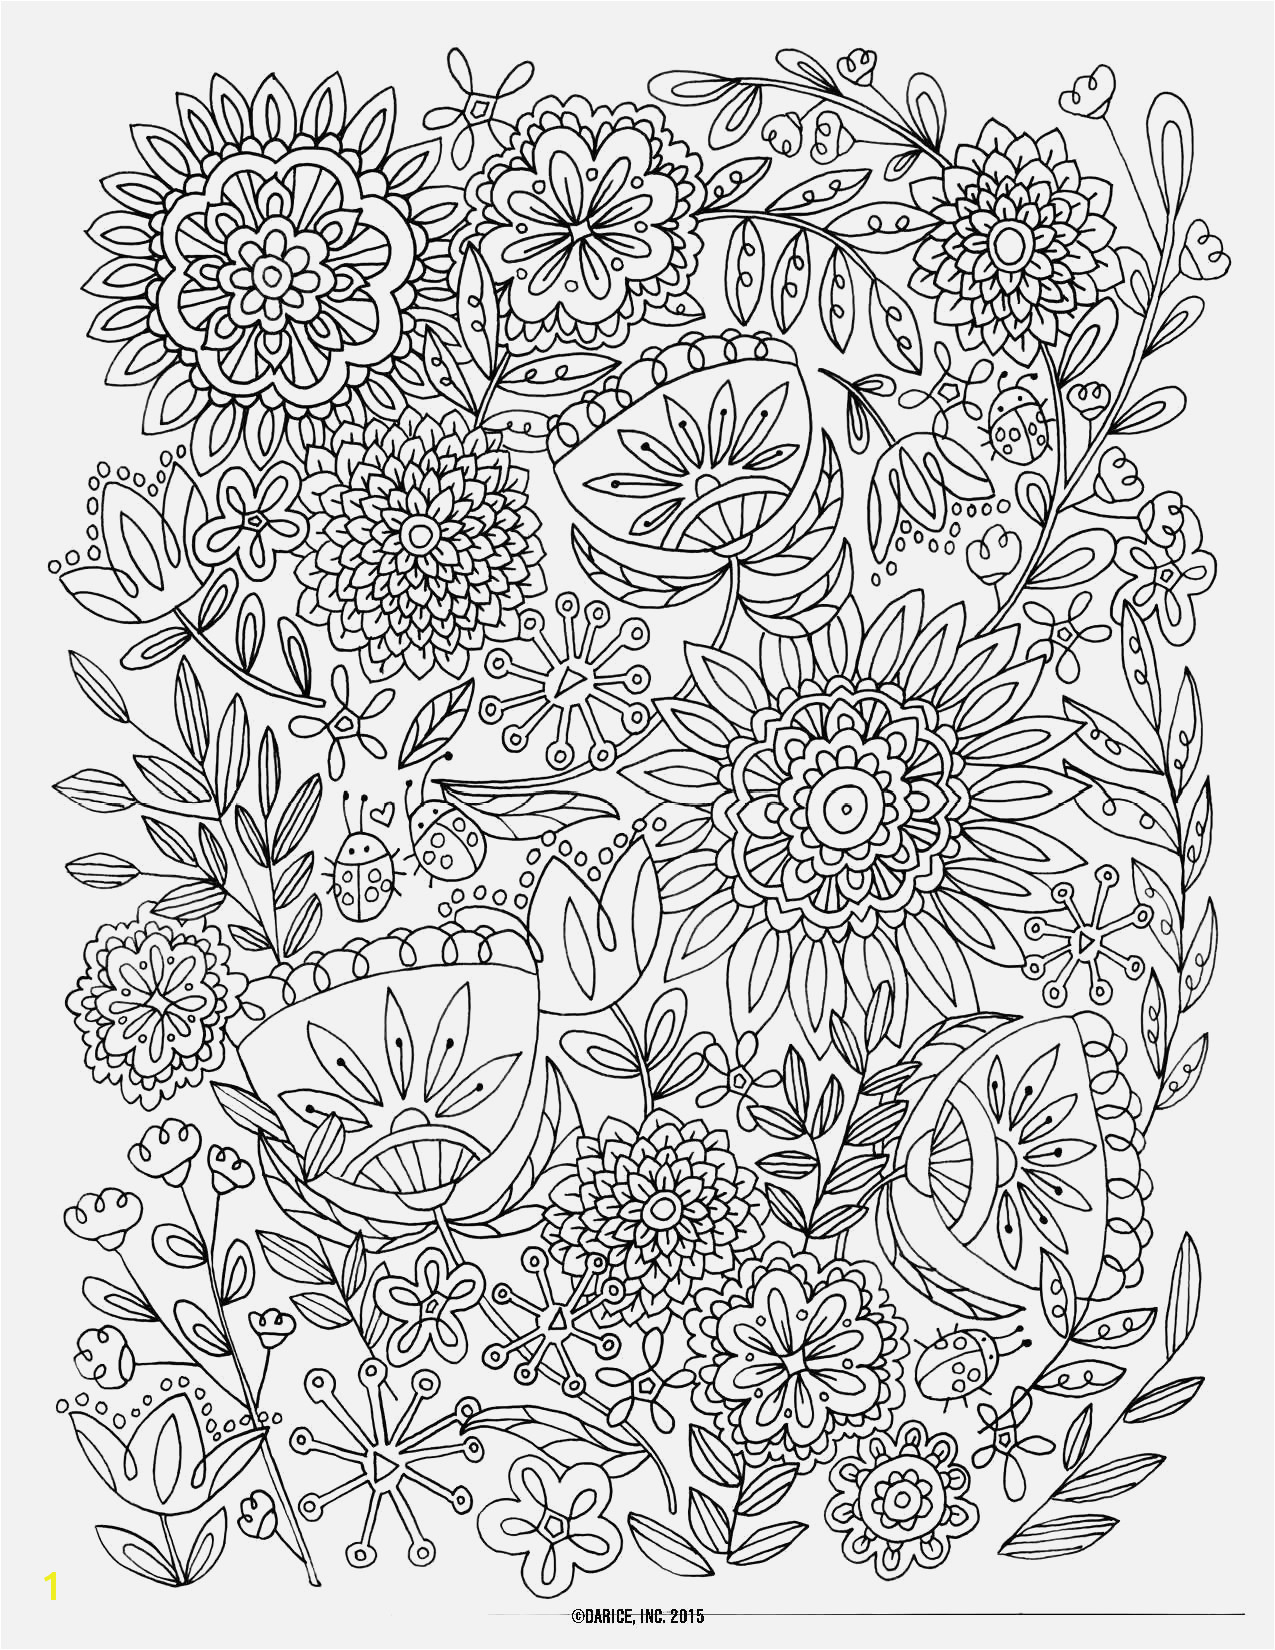 Coloring Pages Hard Coloring & Activity Hard Christmas Coloring Pages Free Coloring Pages Hard Easy